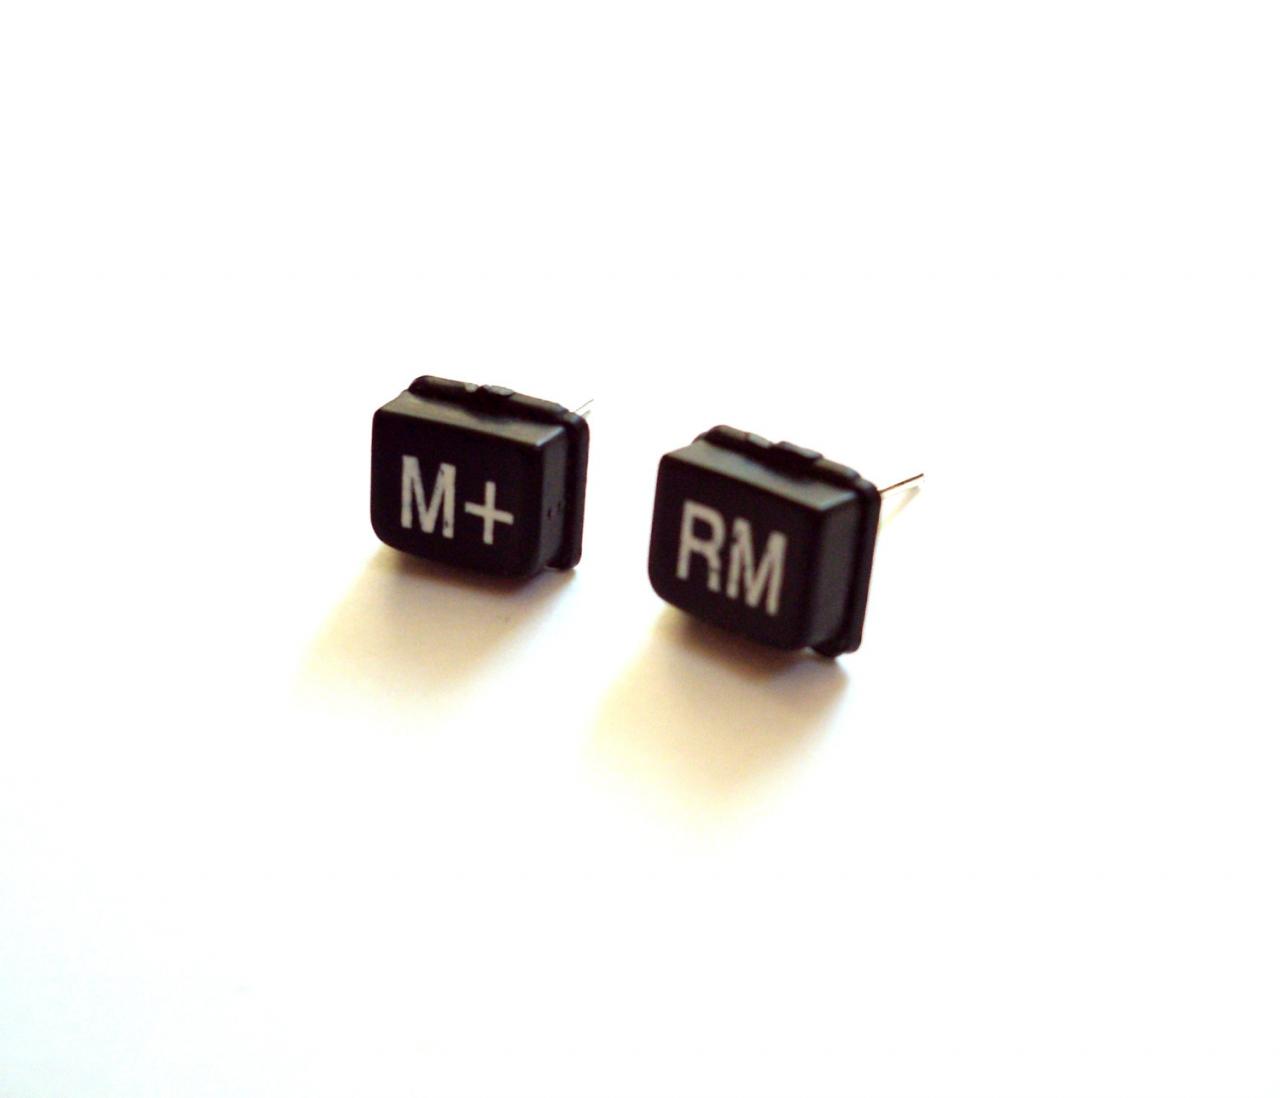 Science Jewelry Black Ear Studs Made Of Repurposed Calculator Keys M+ Rm Upcycled Jewelry Geek Earrings Recycled Techie Nerd Jewelry